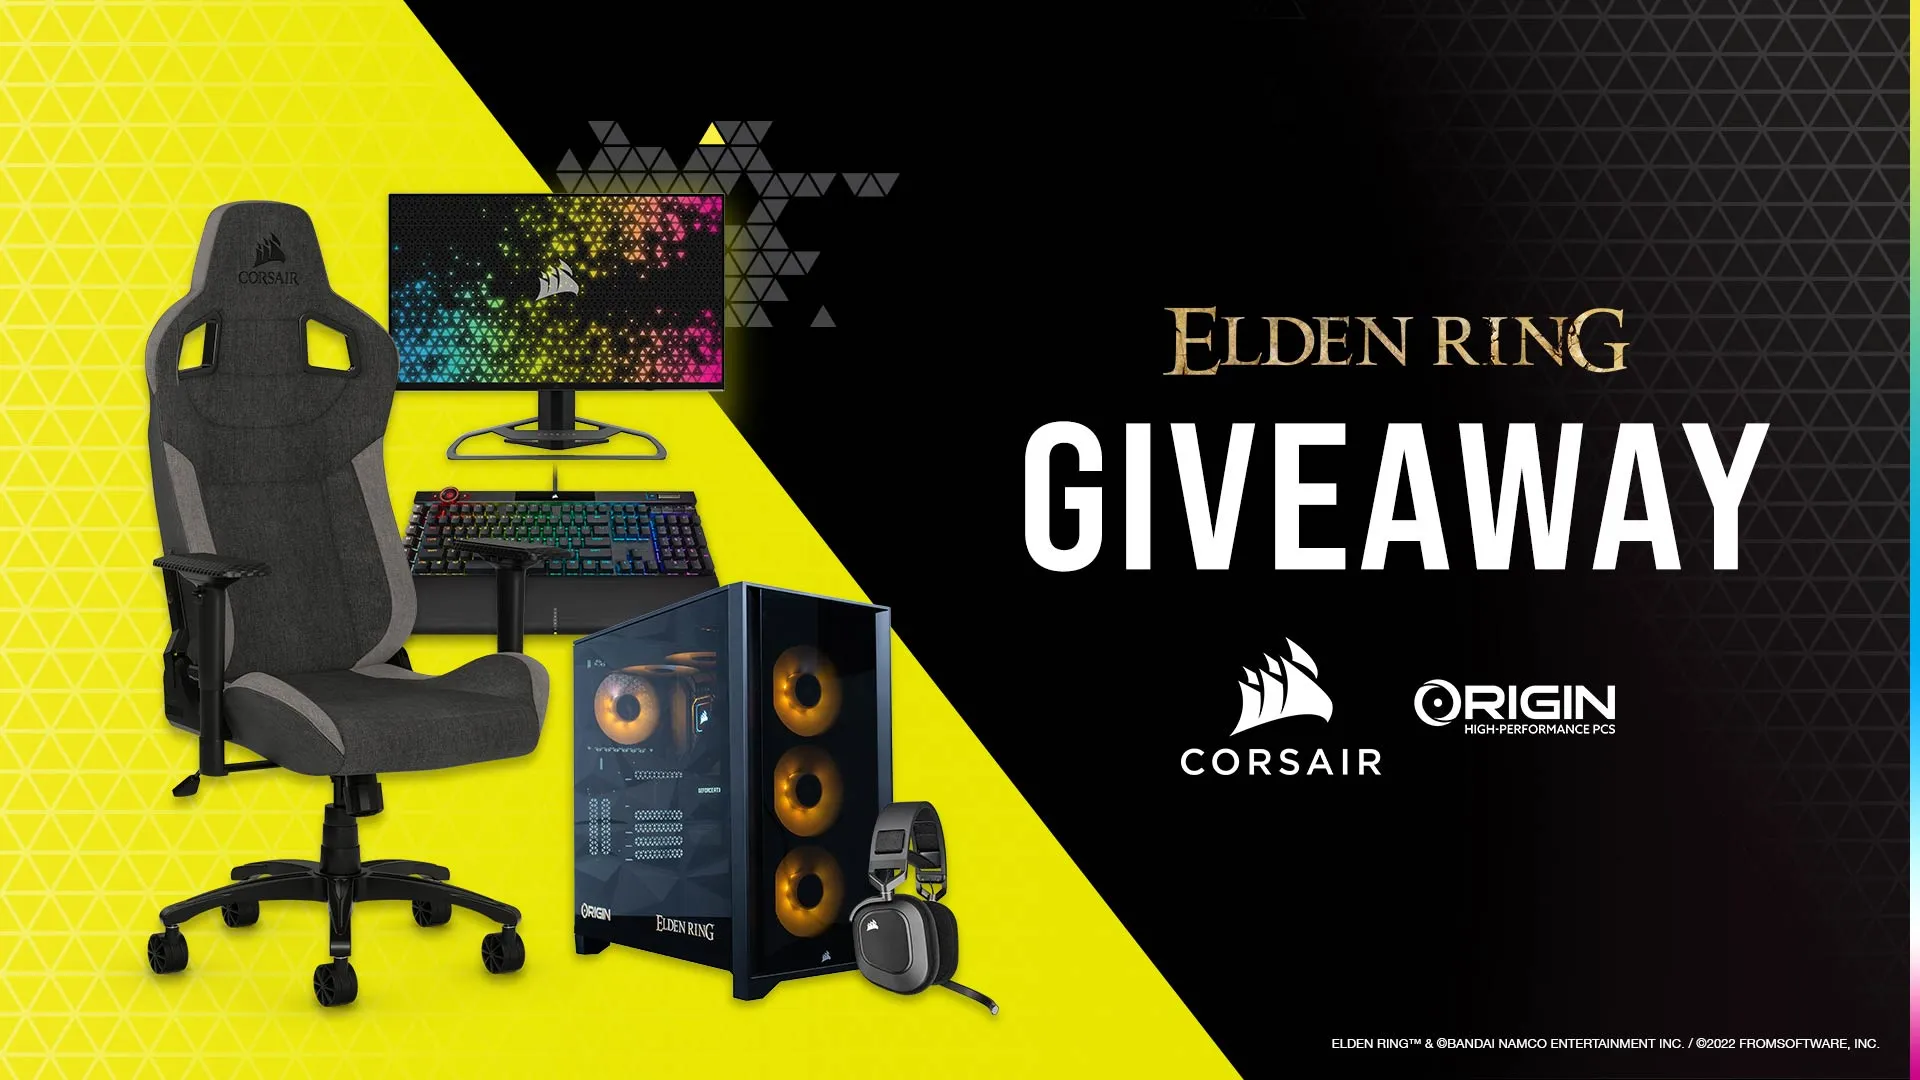 GIVEAWAY: Win a custom Elden Ring-themed Millennium Desktop PC, gaming chair, and more